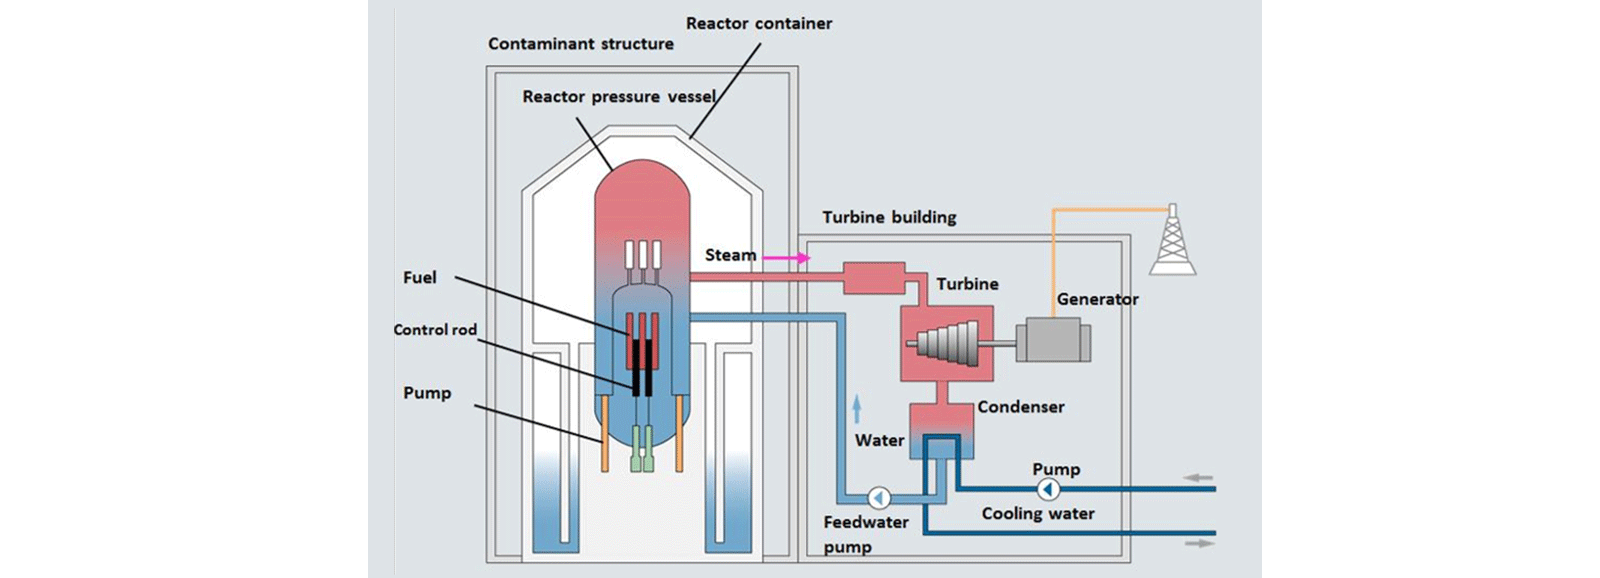 Nuclear power plants: boiling water reactor (BWR)